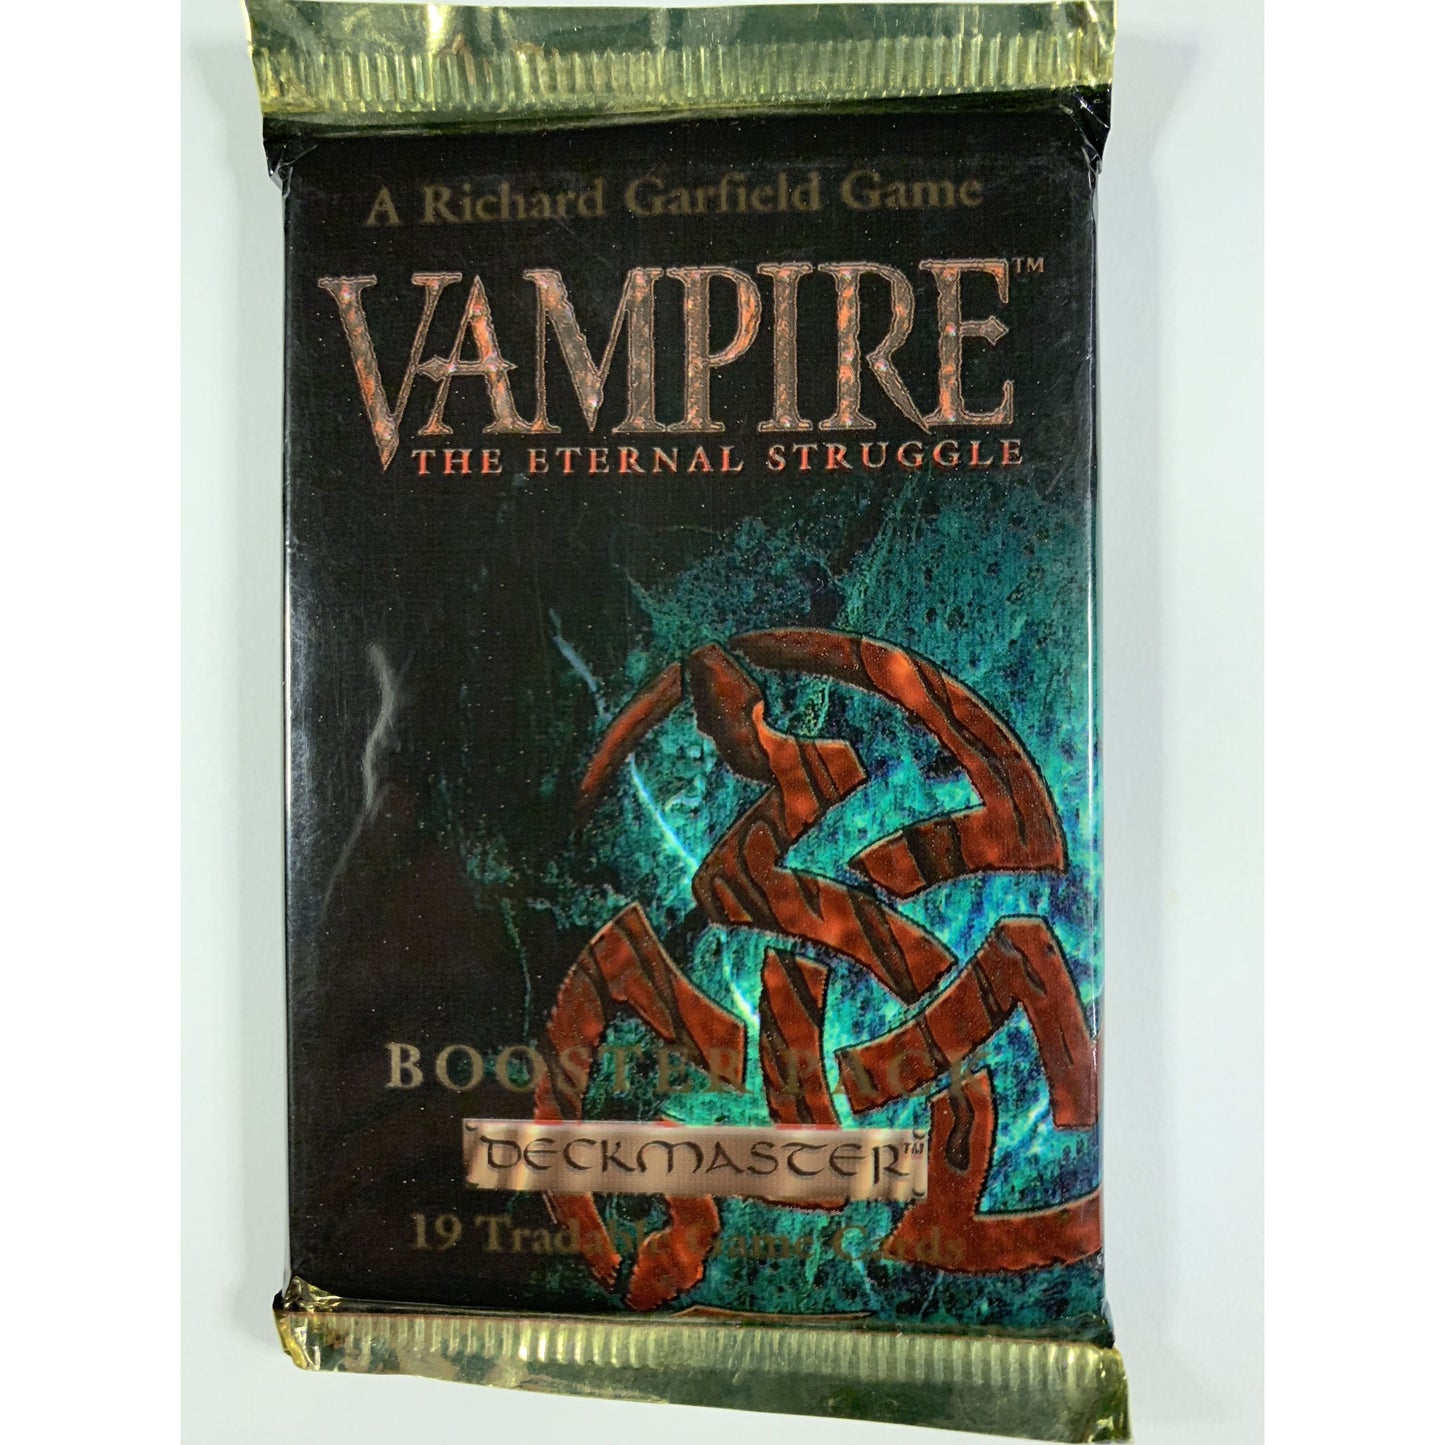  Vampire The Eternal Struggle Booster Pack  Local Legends Cards & Collectibles